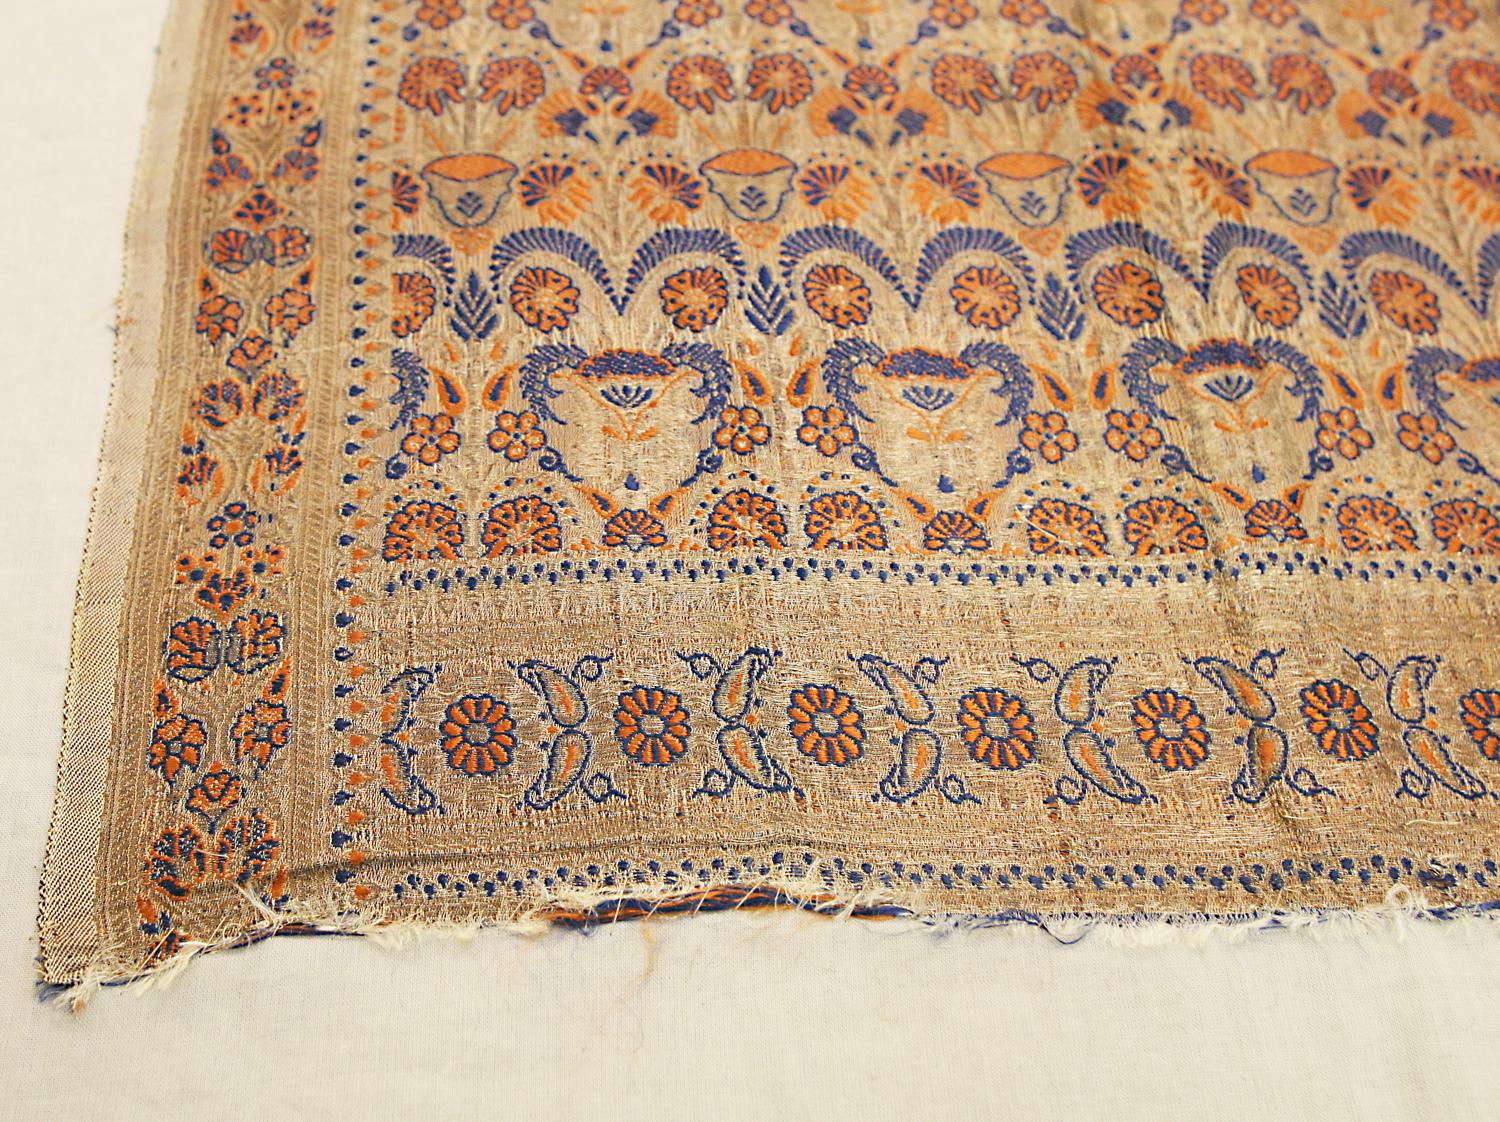 This is a rare antique silk Indian textile woven during the end of the 19th century that measures 164 x 56 CM in size. The design of this rug is based on an early 18th century repeating vase design. In this specific example, there are alternating